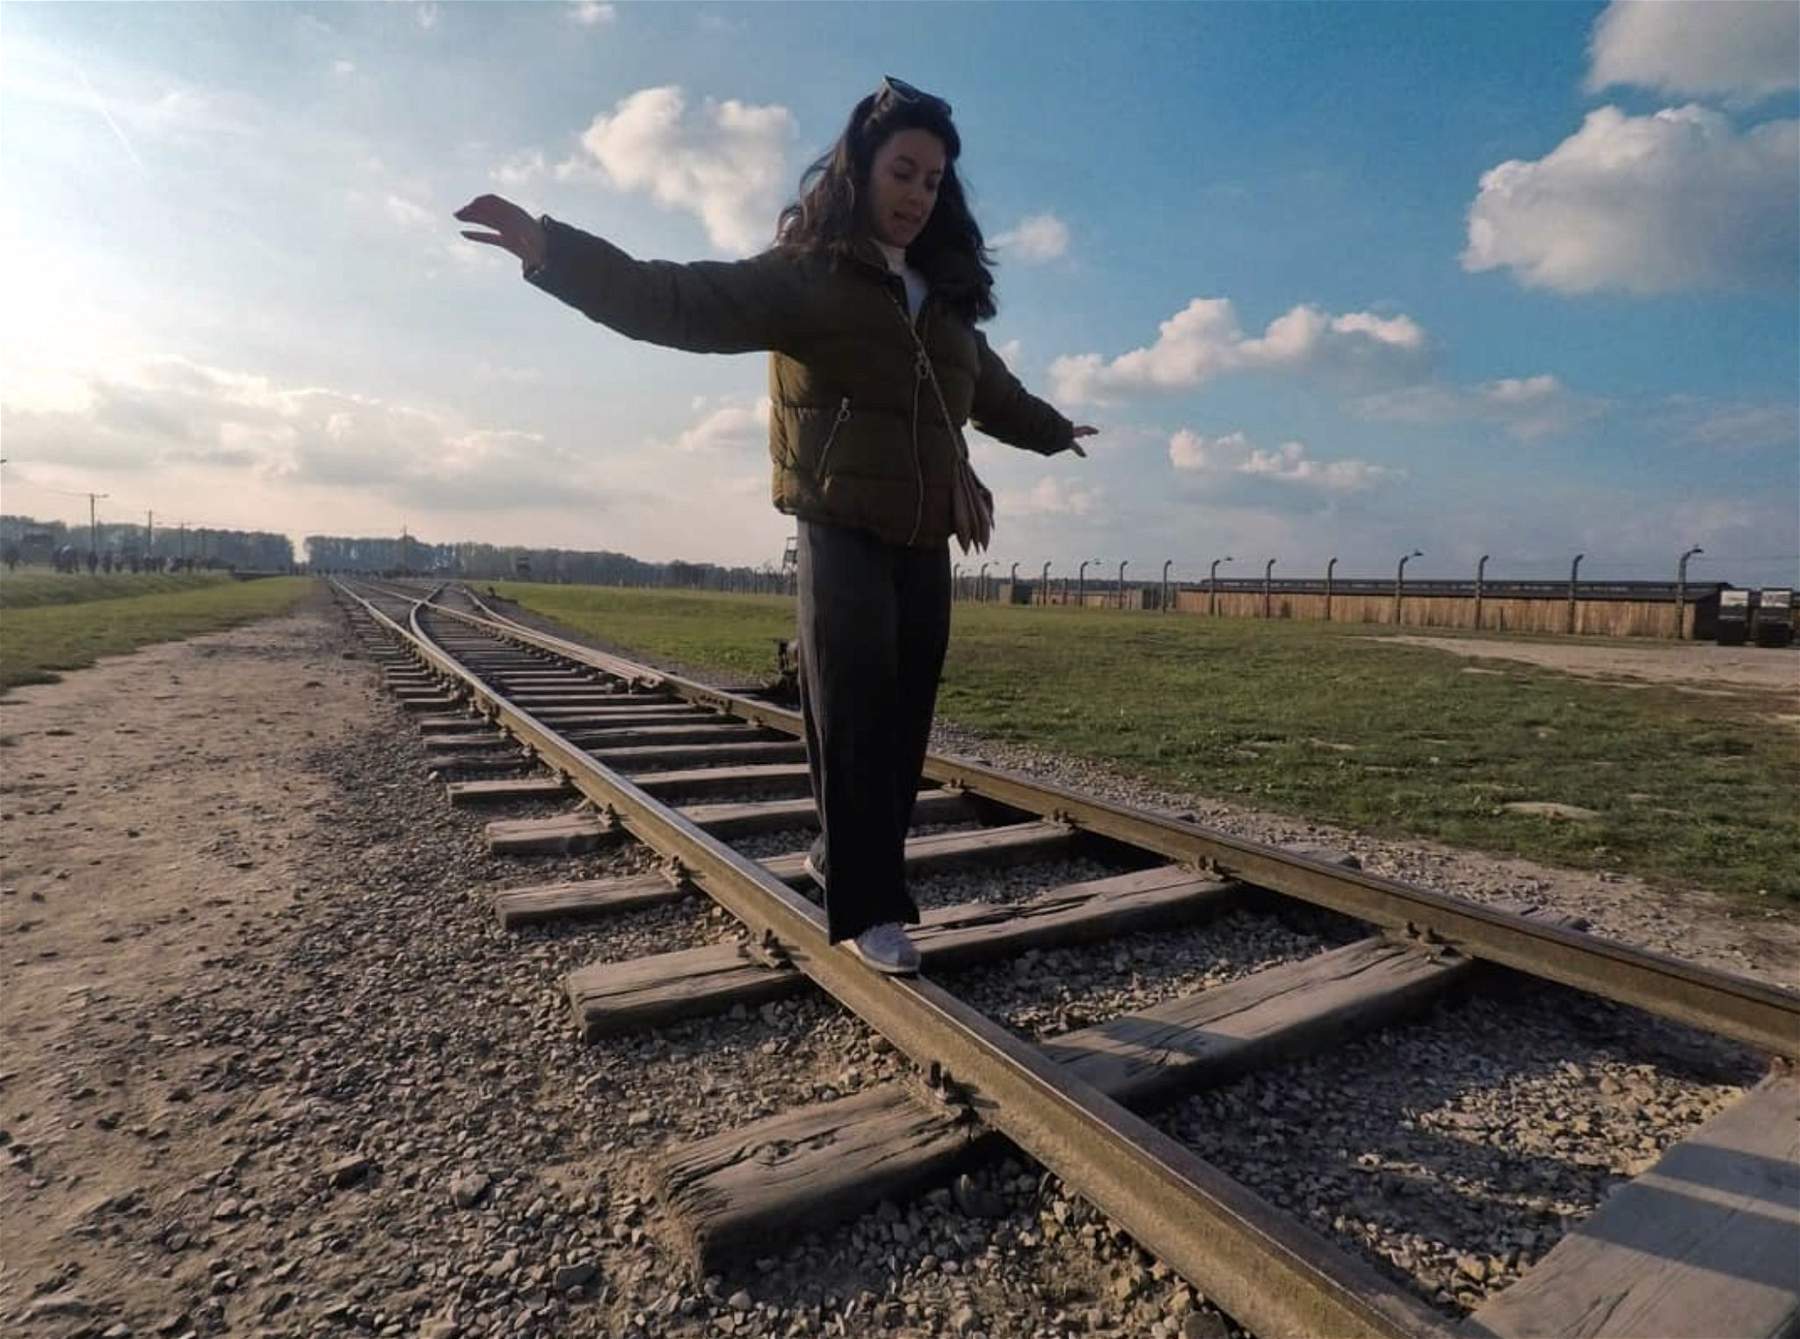 Auschwitz, appeal against inappropriate photos. There are other places to learn how to balance on a track